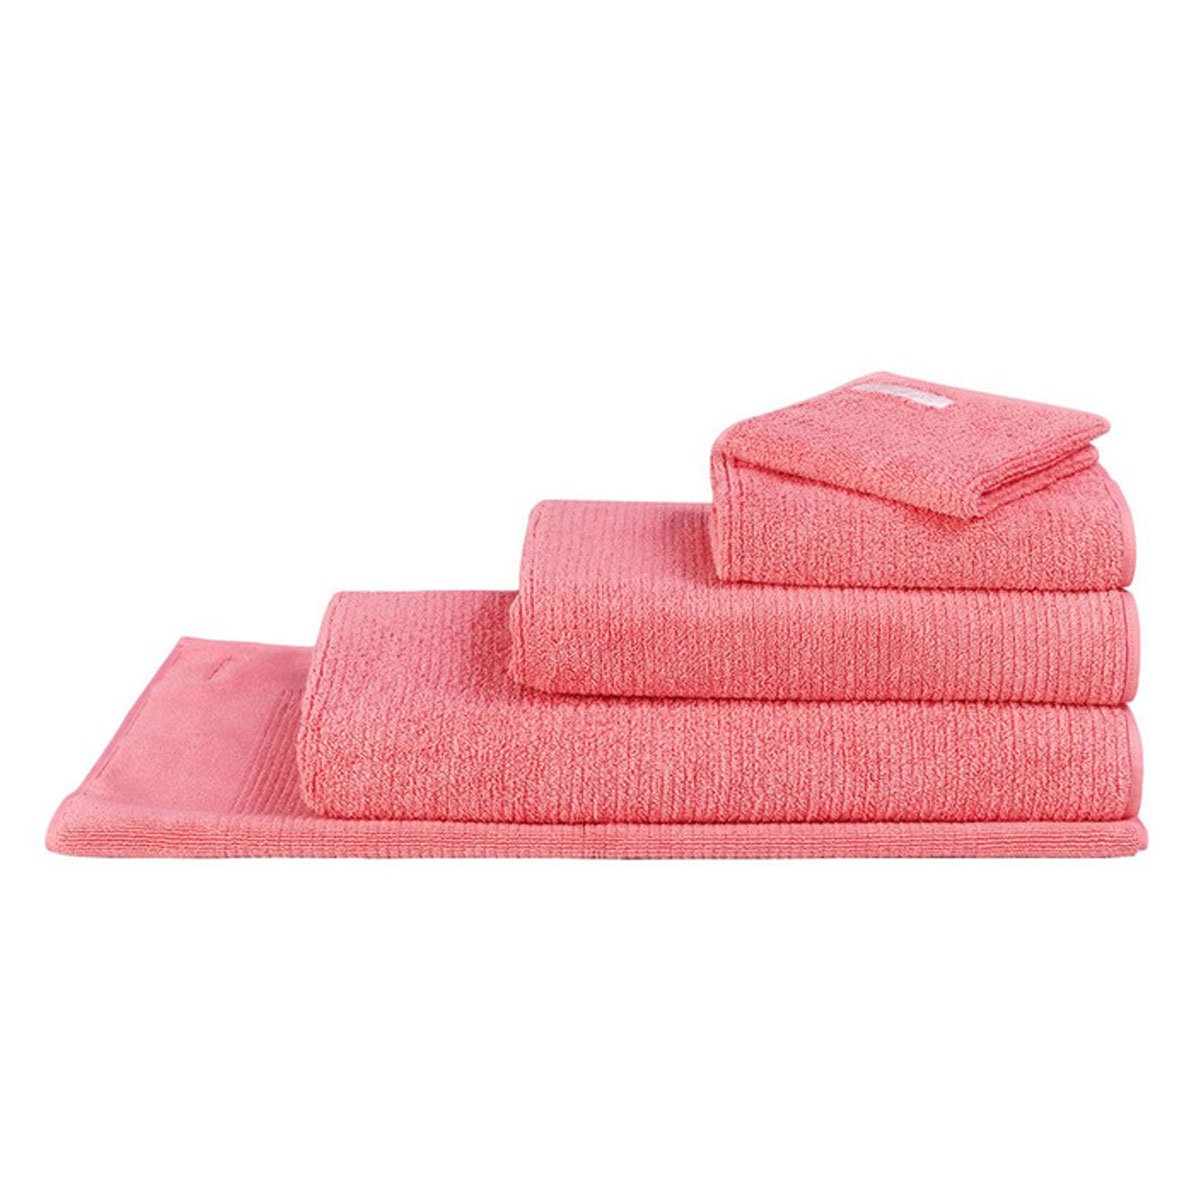 Living Textures Trenton Towel Collection by Sheridan PEONY